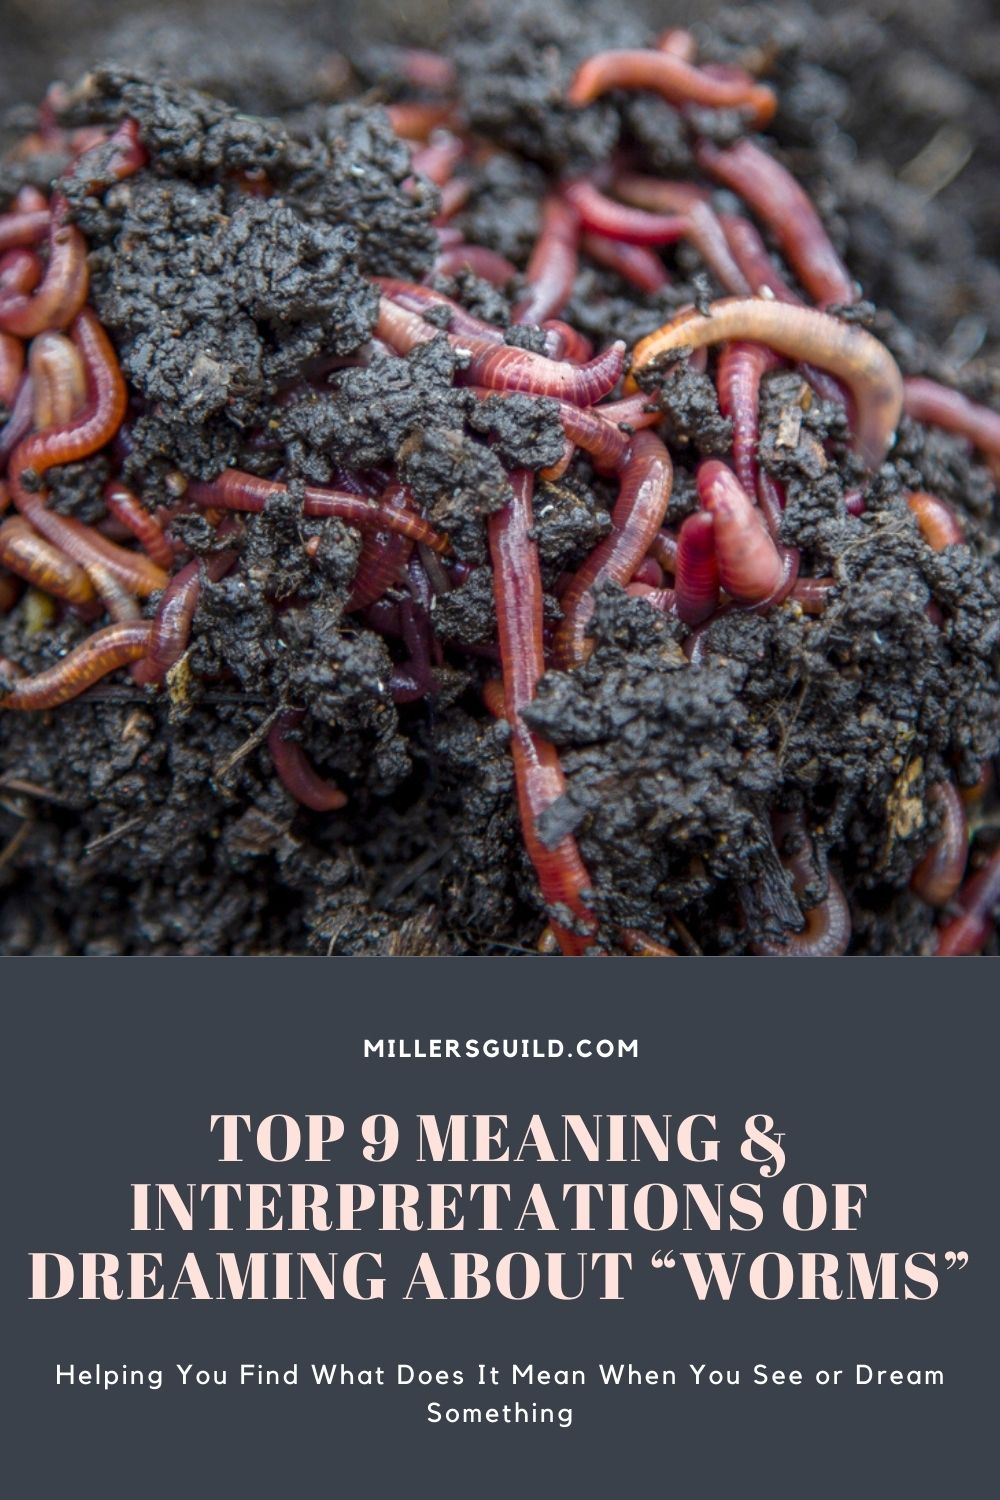 Top 9 Meaning & Interpretations of Dreaming About Worms 2